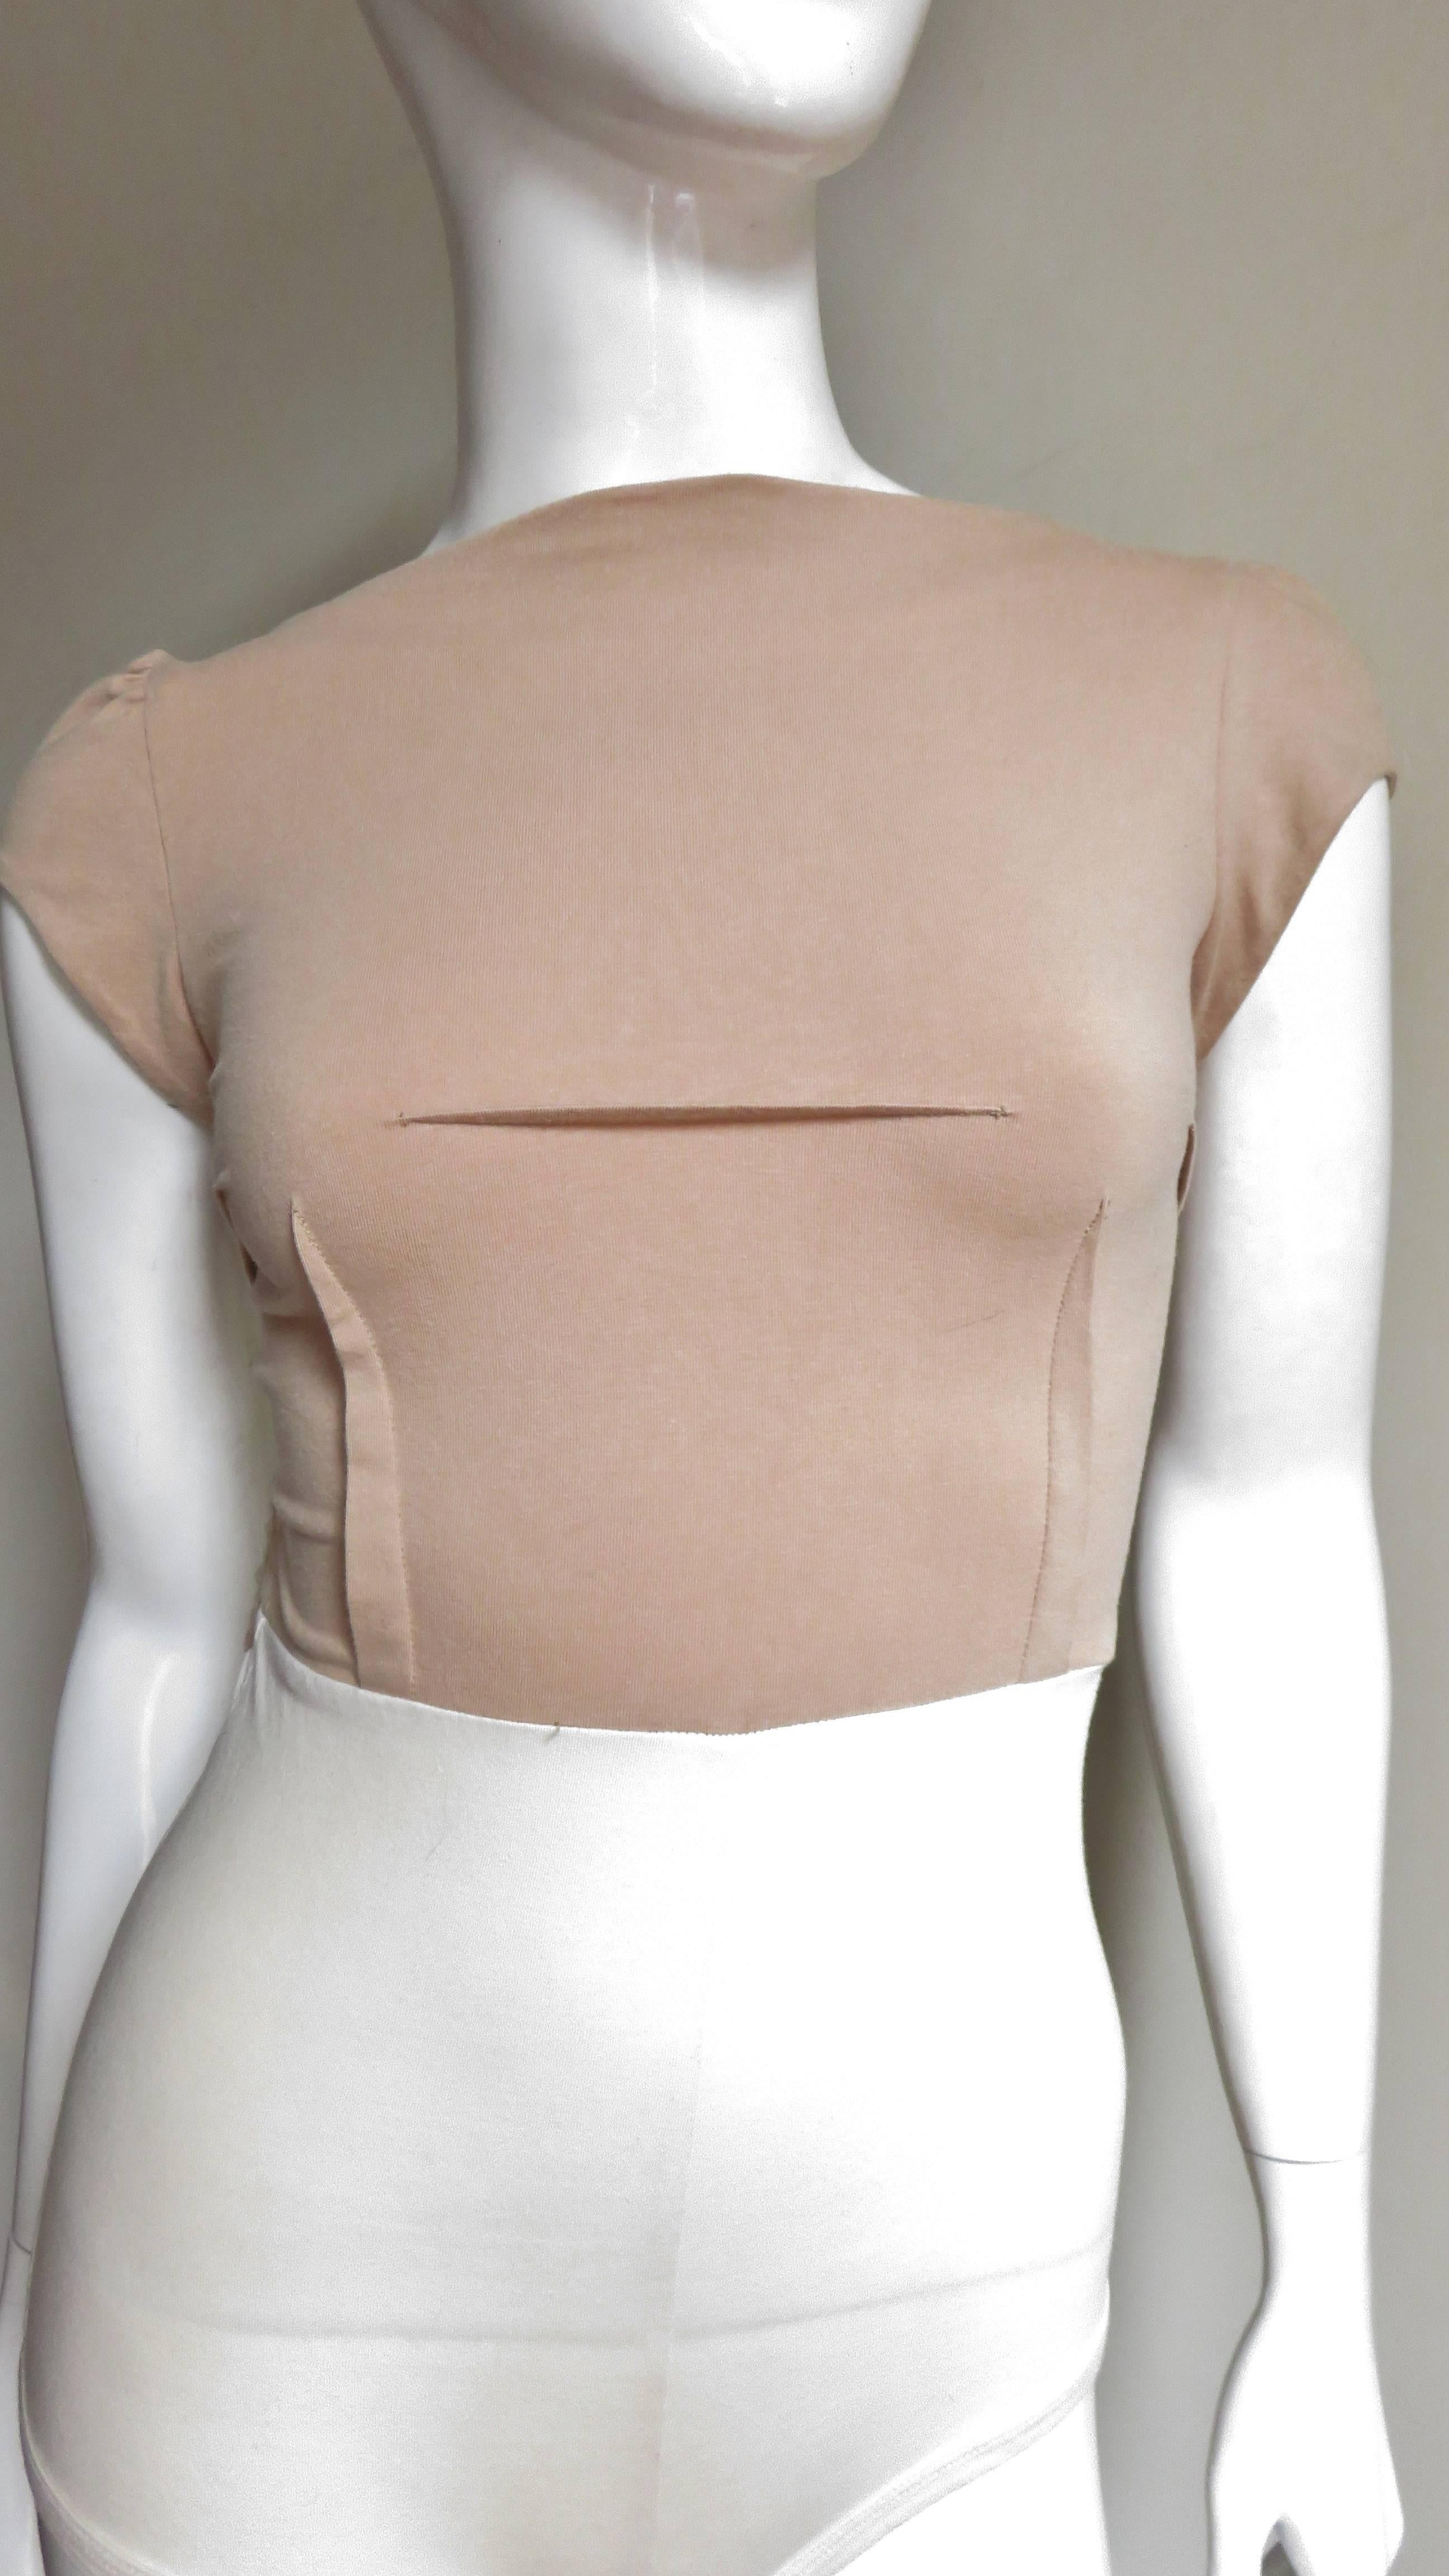 A fabulous early piece from Belgian designer Martin Margiela.  Never worn it is a cotton knit body suit with a low scoop back, small cap sleeves and a dart detailed front.  The top portion is light tan and the bottom is off white.  The casing for